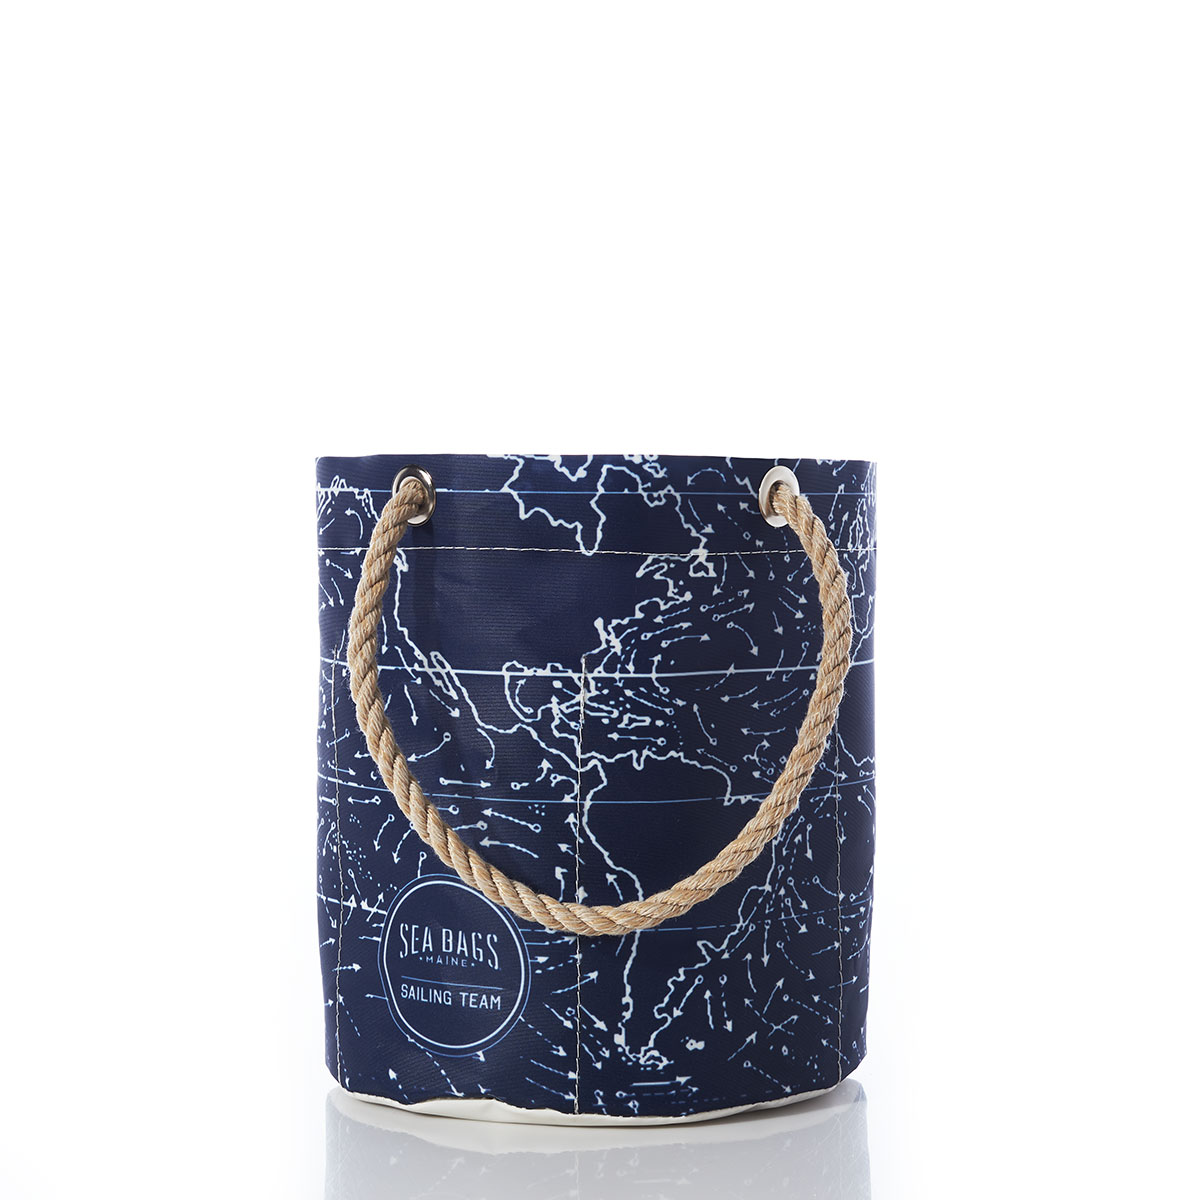 white arrows showing currents swirl around white outlined continents on a navy recycled sail cloth beverage bucket with hemp rope handles